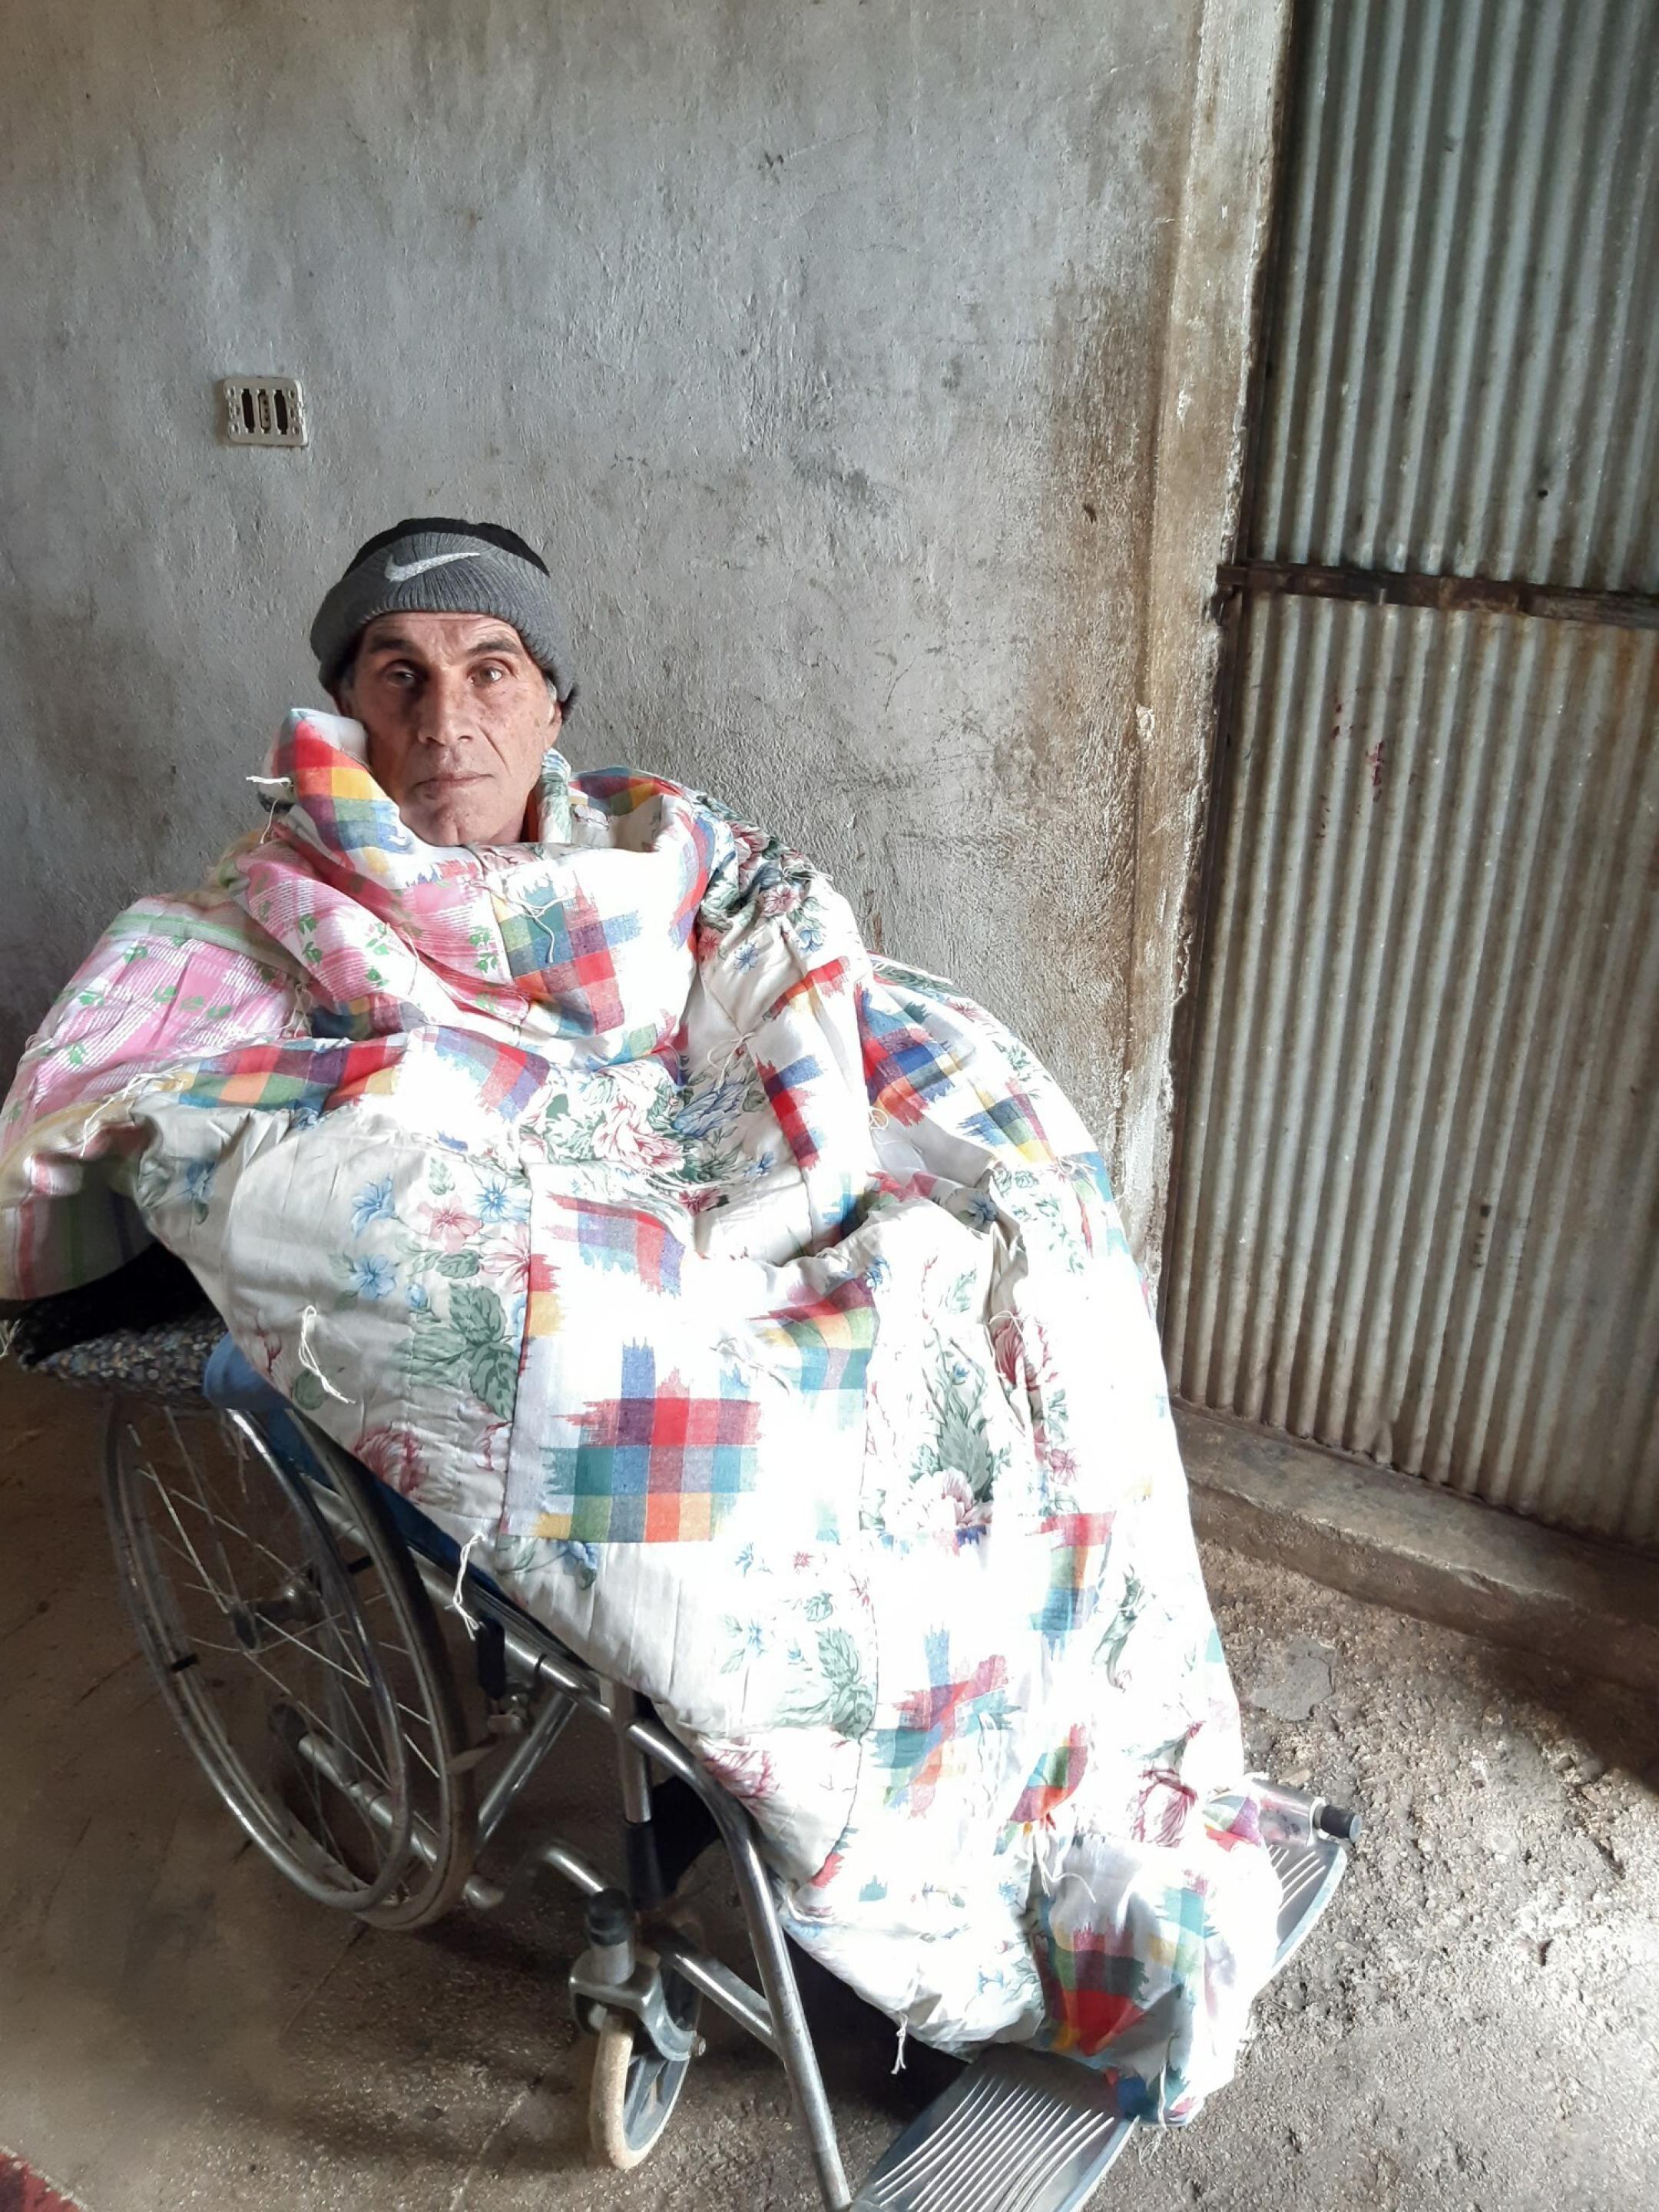 A man sitting in a wheelchair wrapped in a quilt